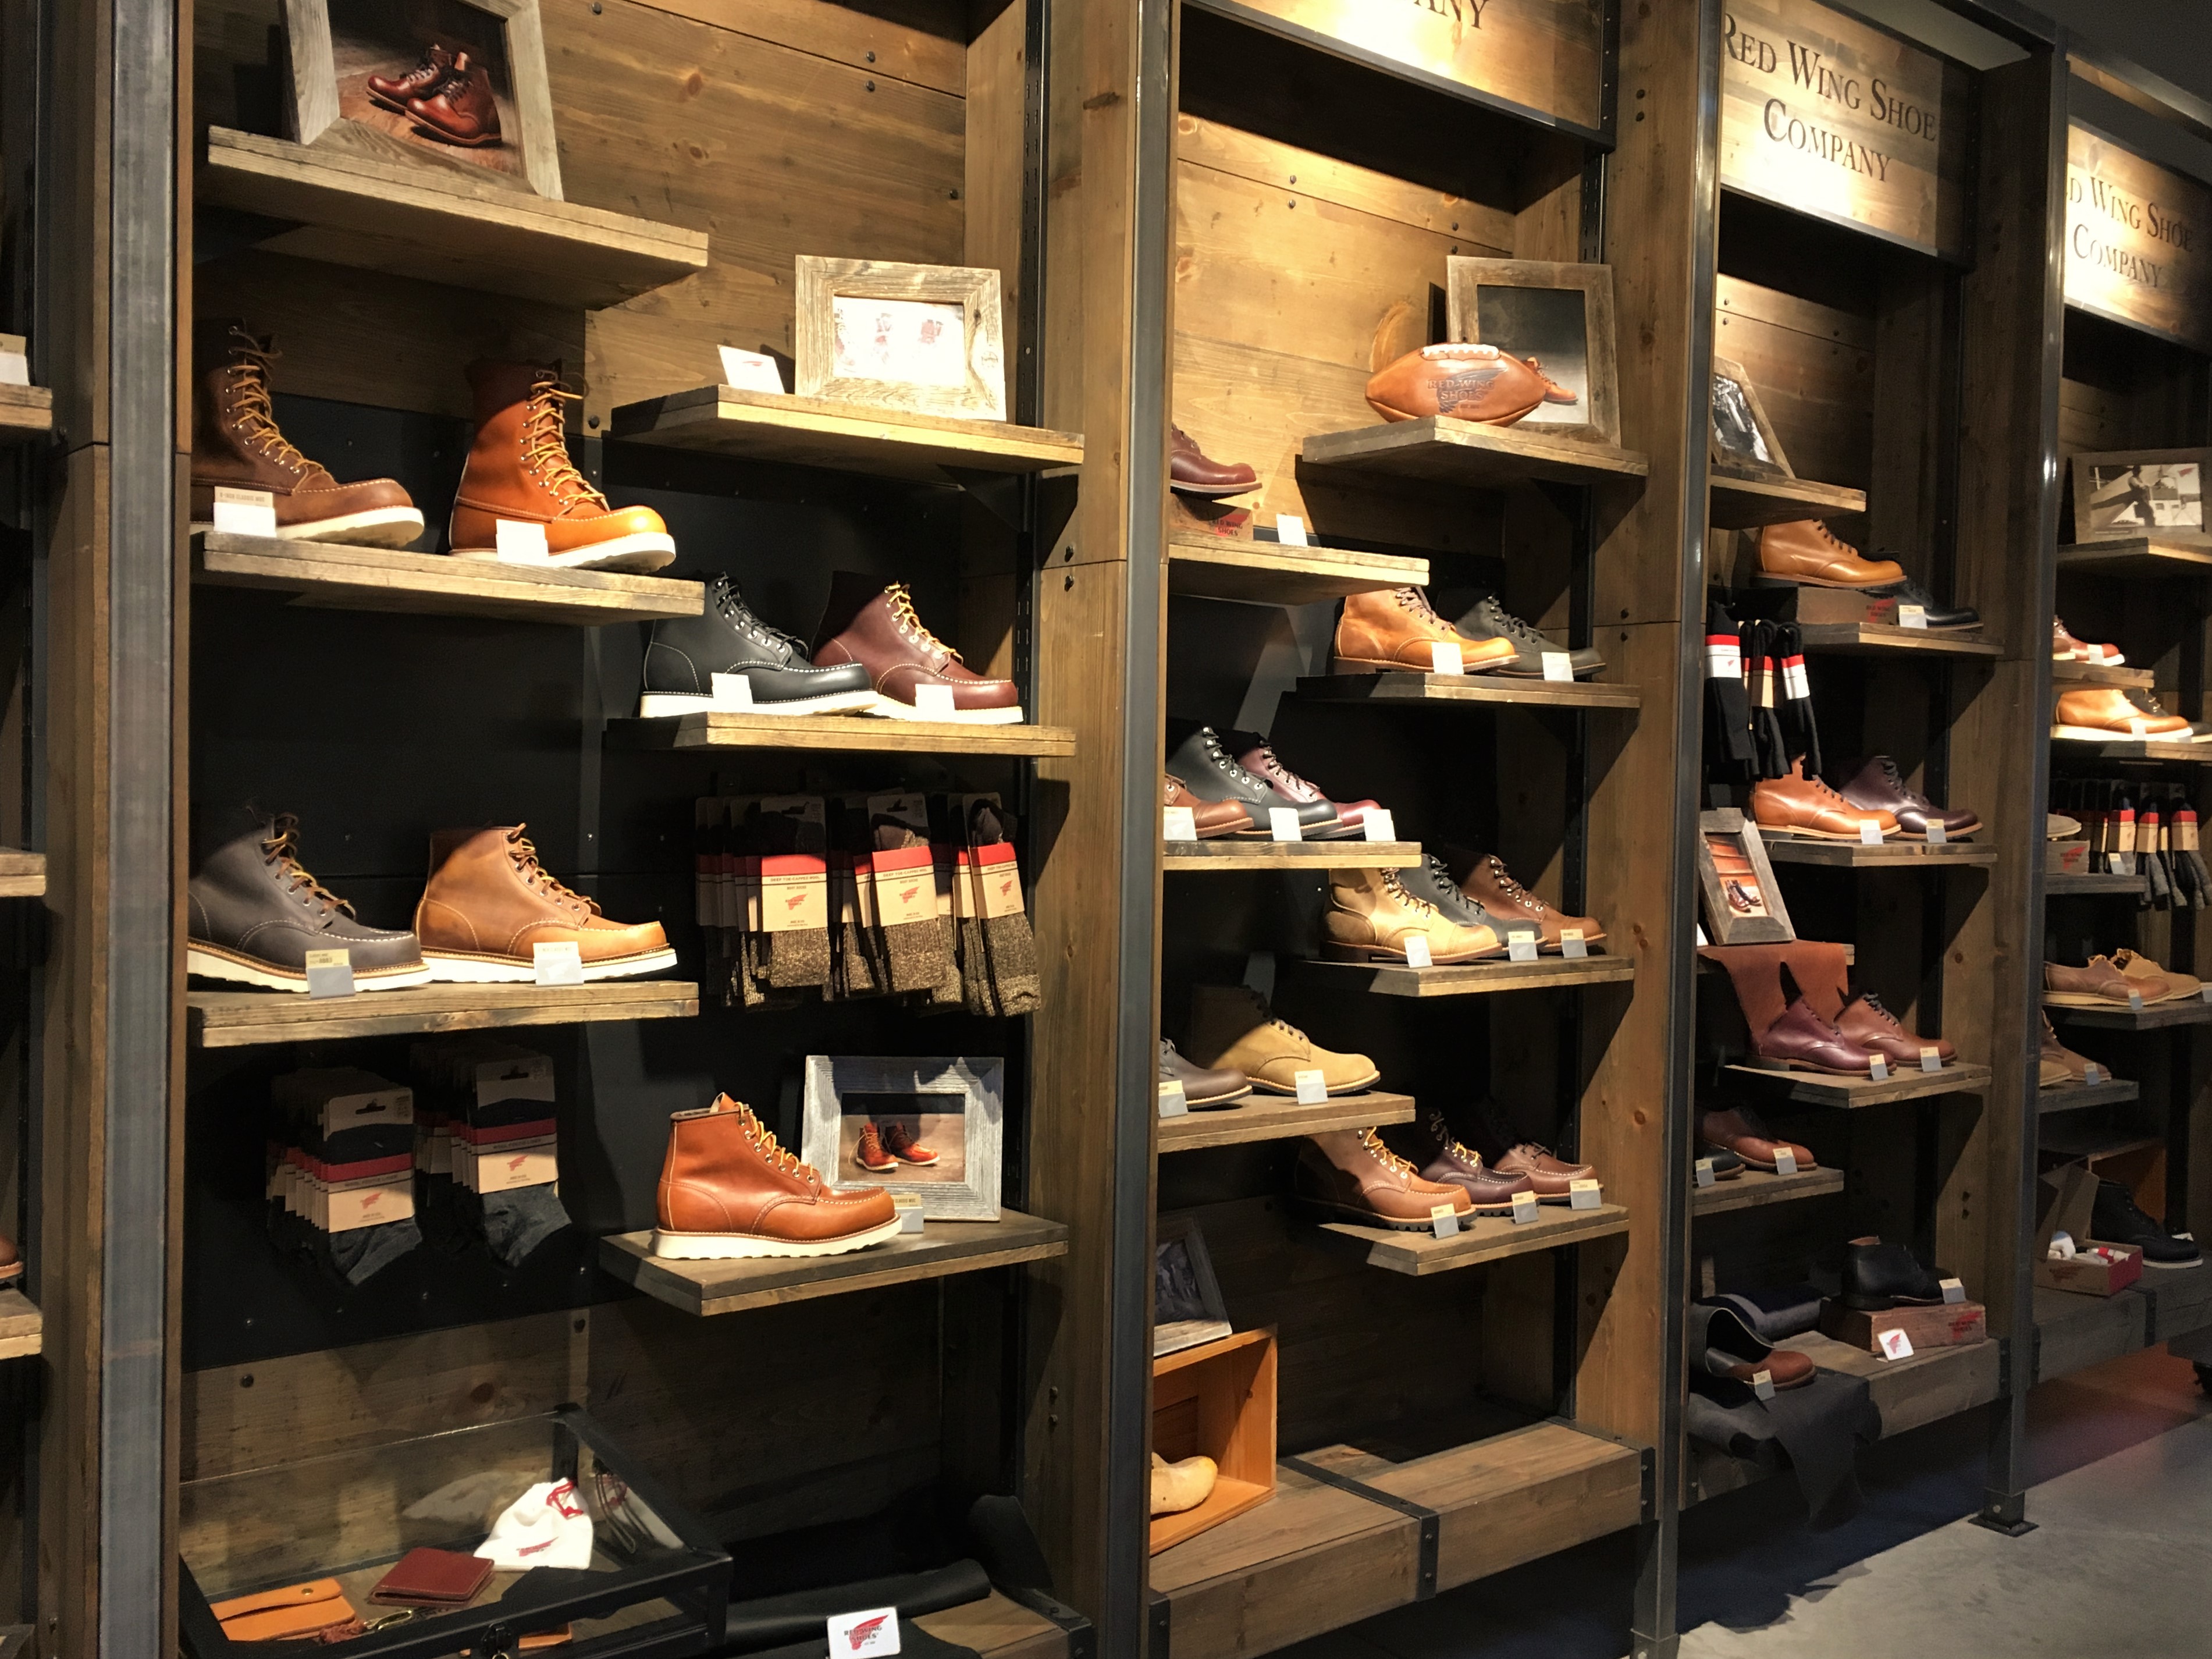 the closest red wing shoe store